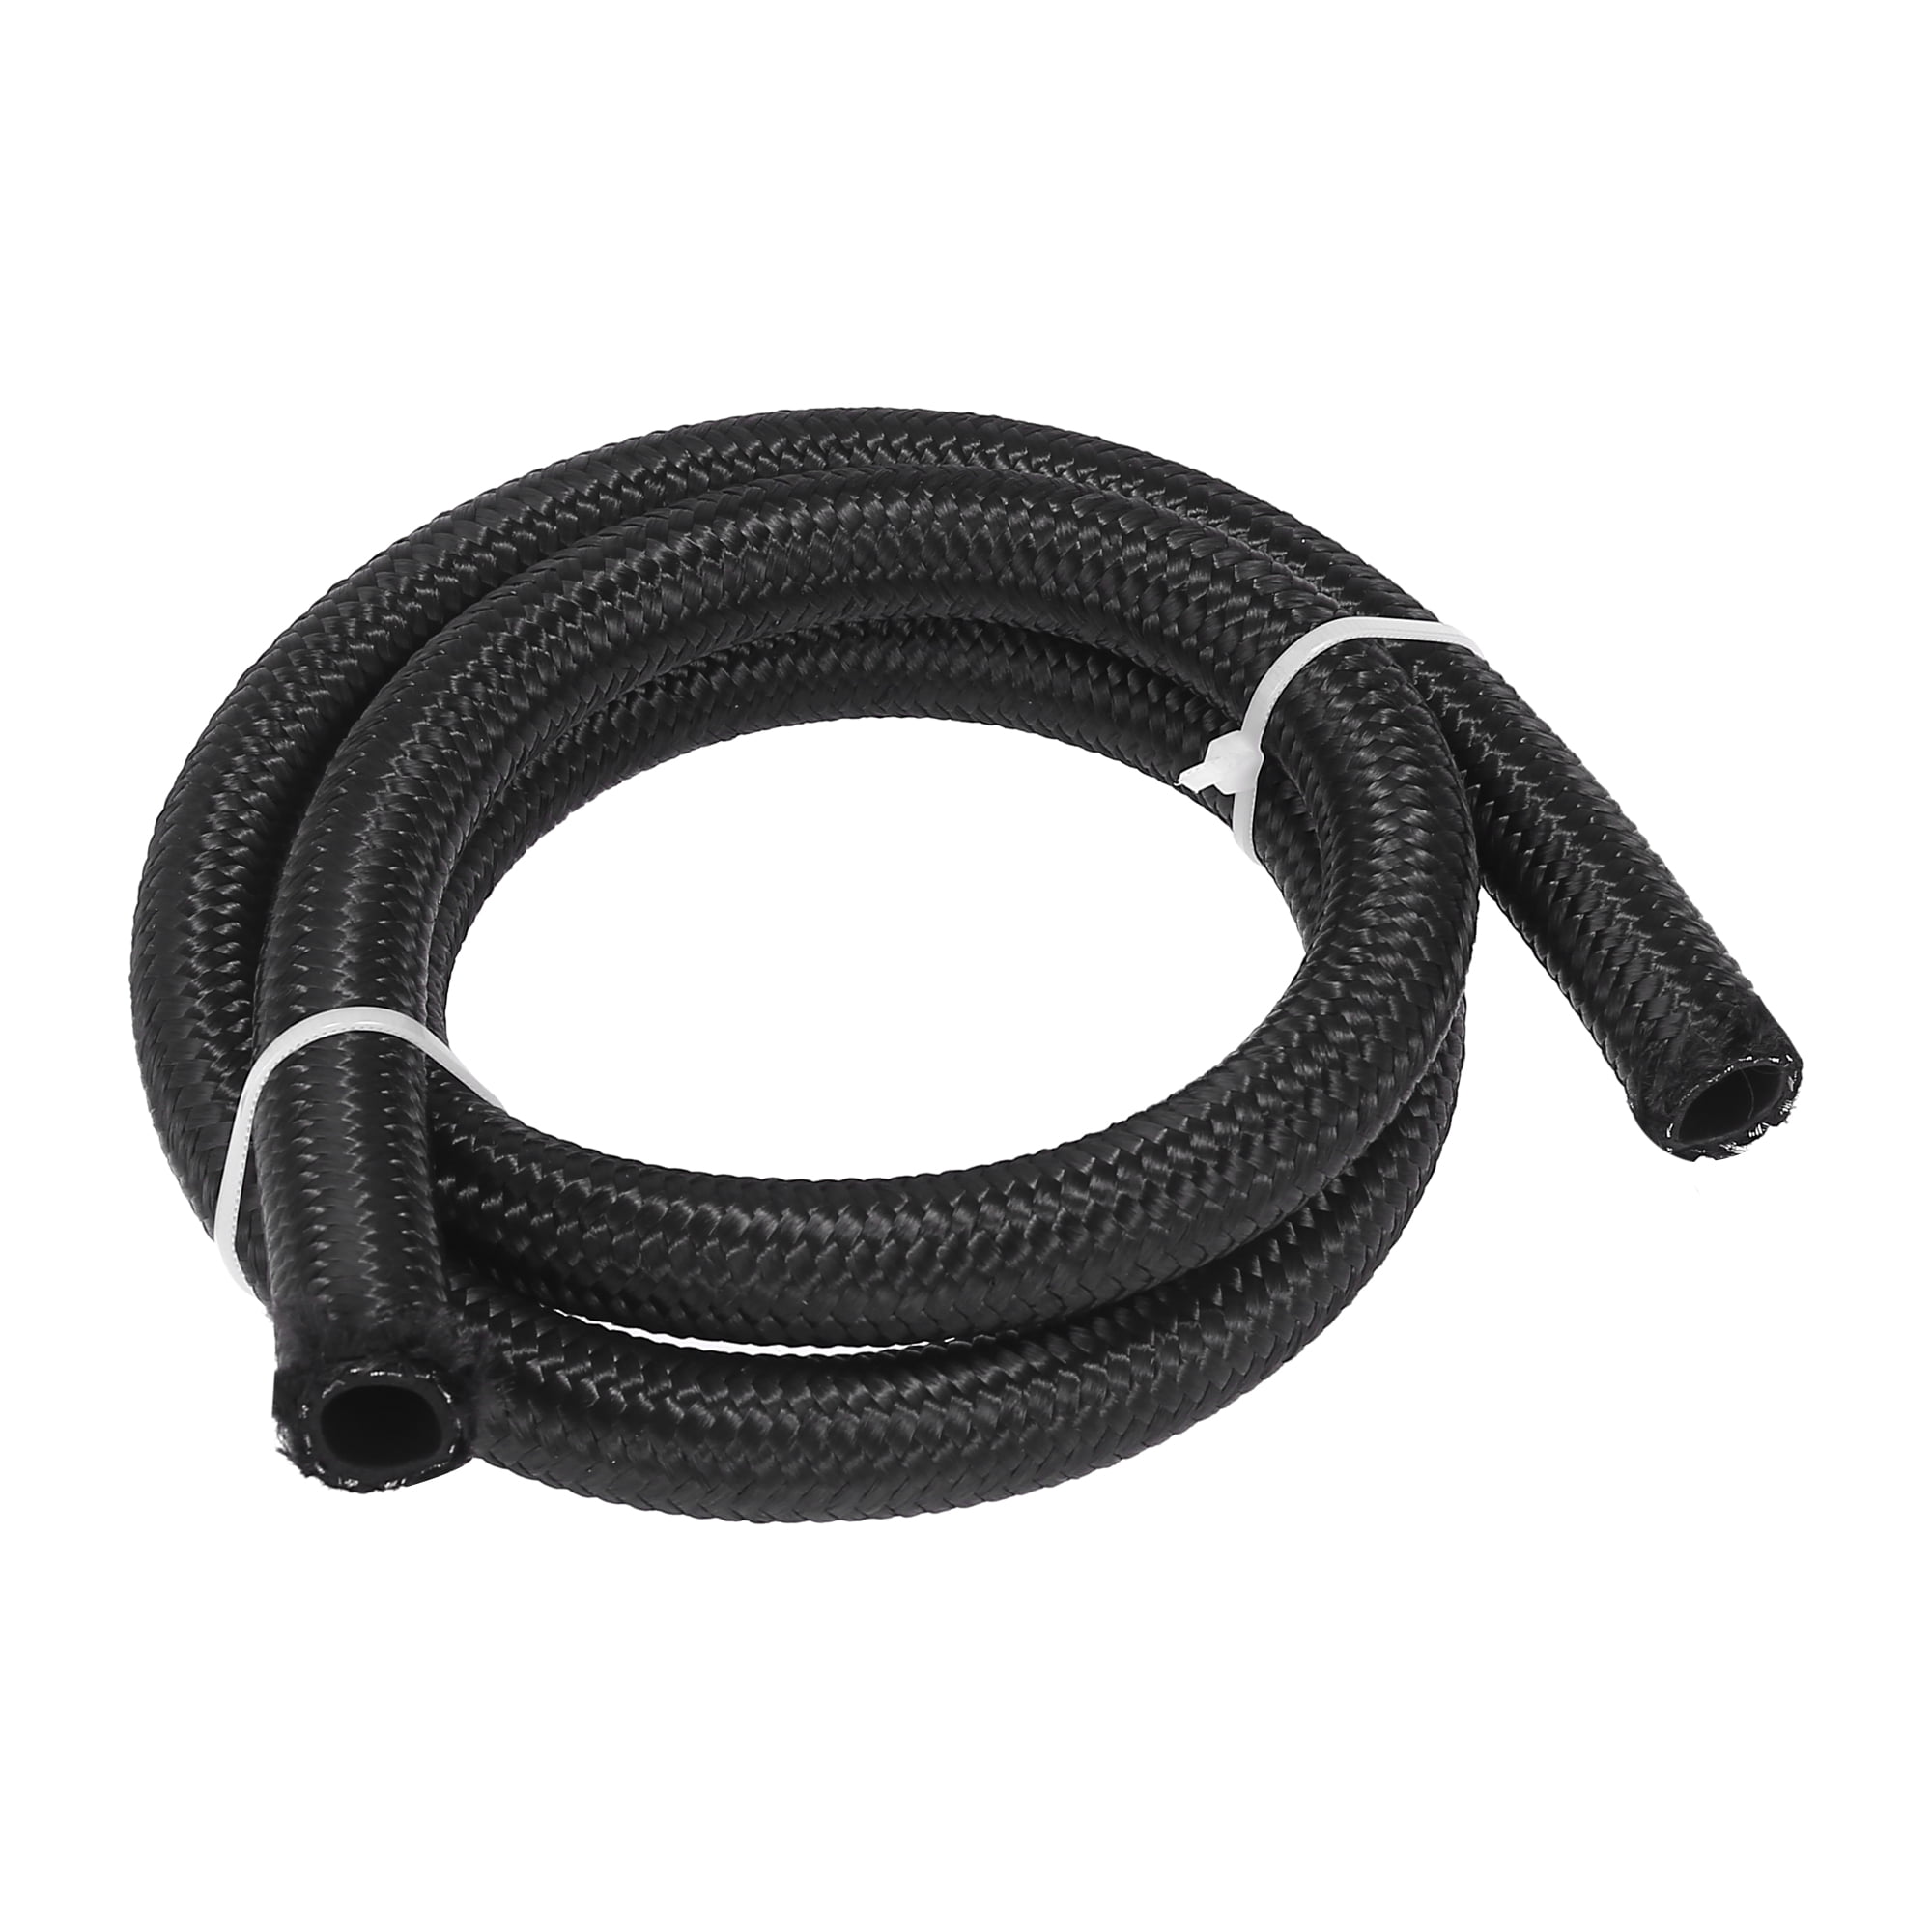 AN10 10AN 10 NYLON BRAIDED TRANSMISSION OIL FUEL LINE GAS WATER HOSE 10M BL 